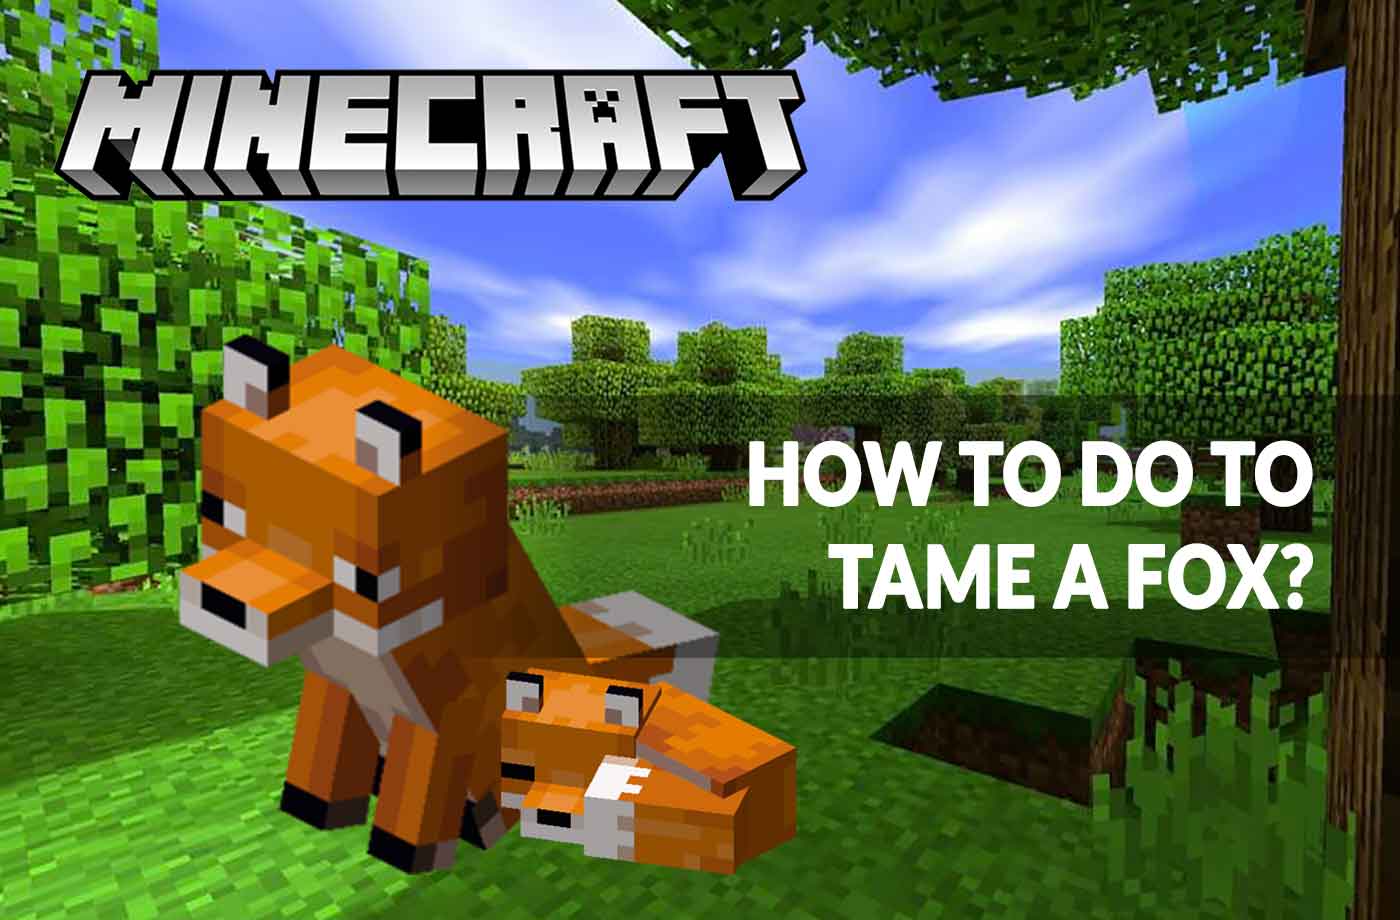 Guide Minecraft 1.14 how to tame a fox